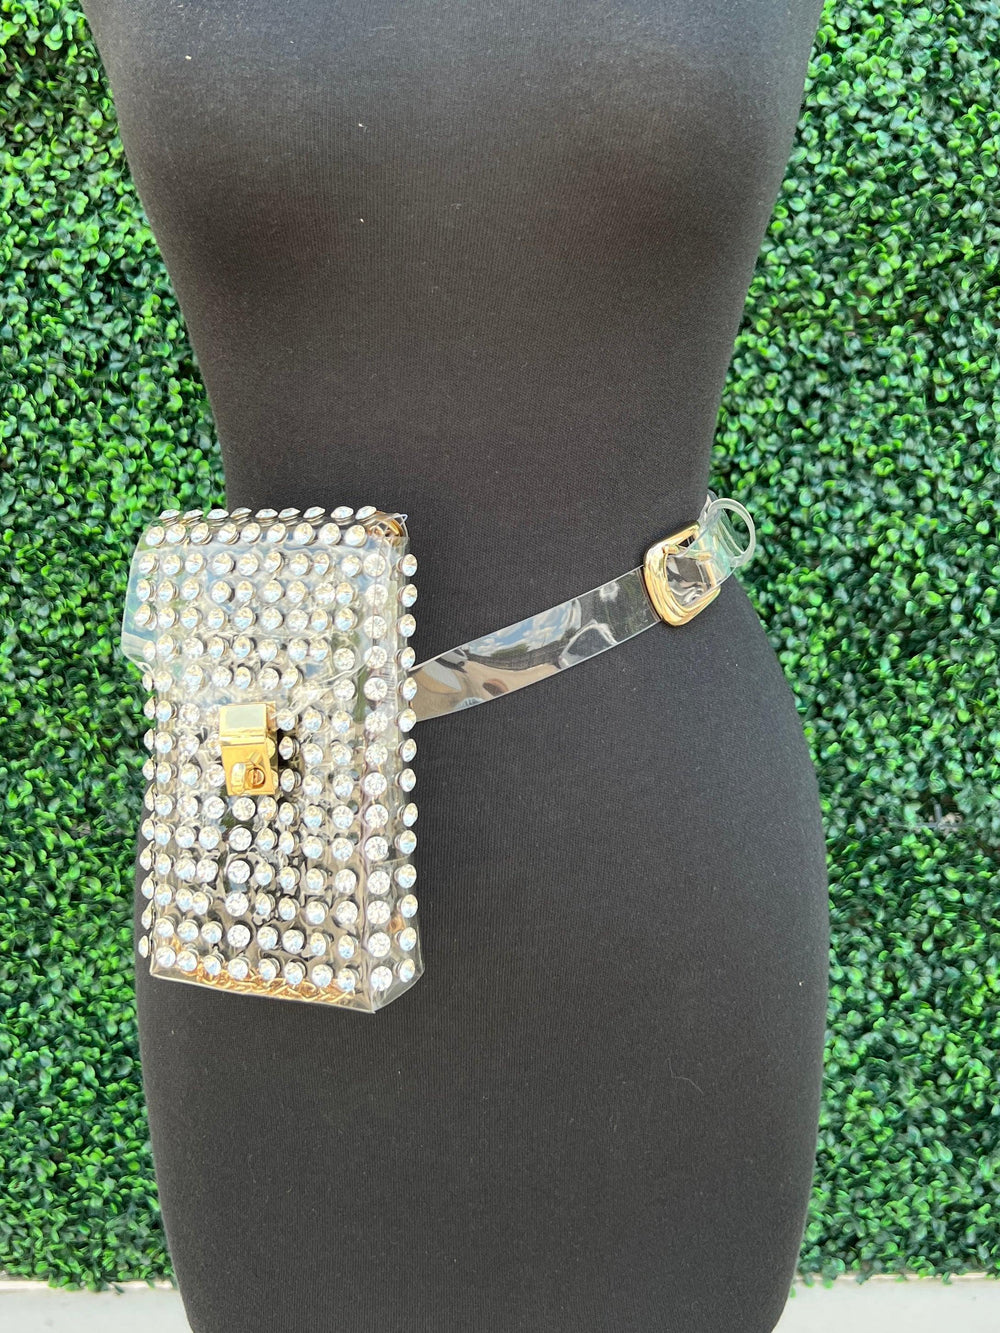 where to find a clear purse/fanny pack for gala game day event houston astros